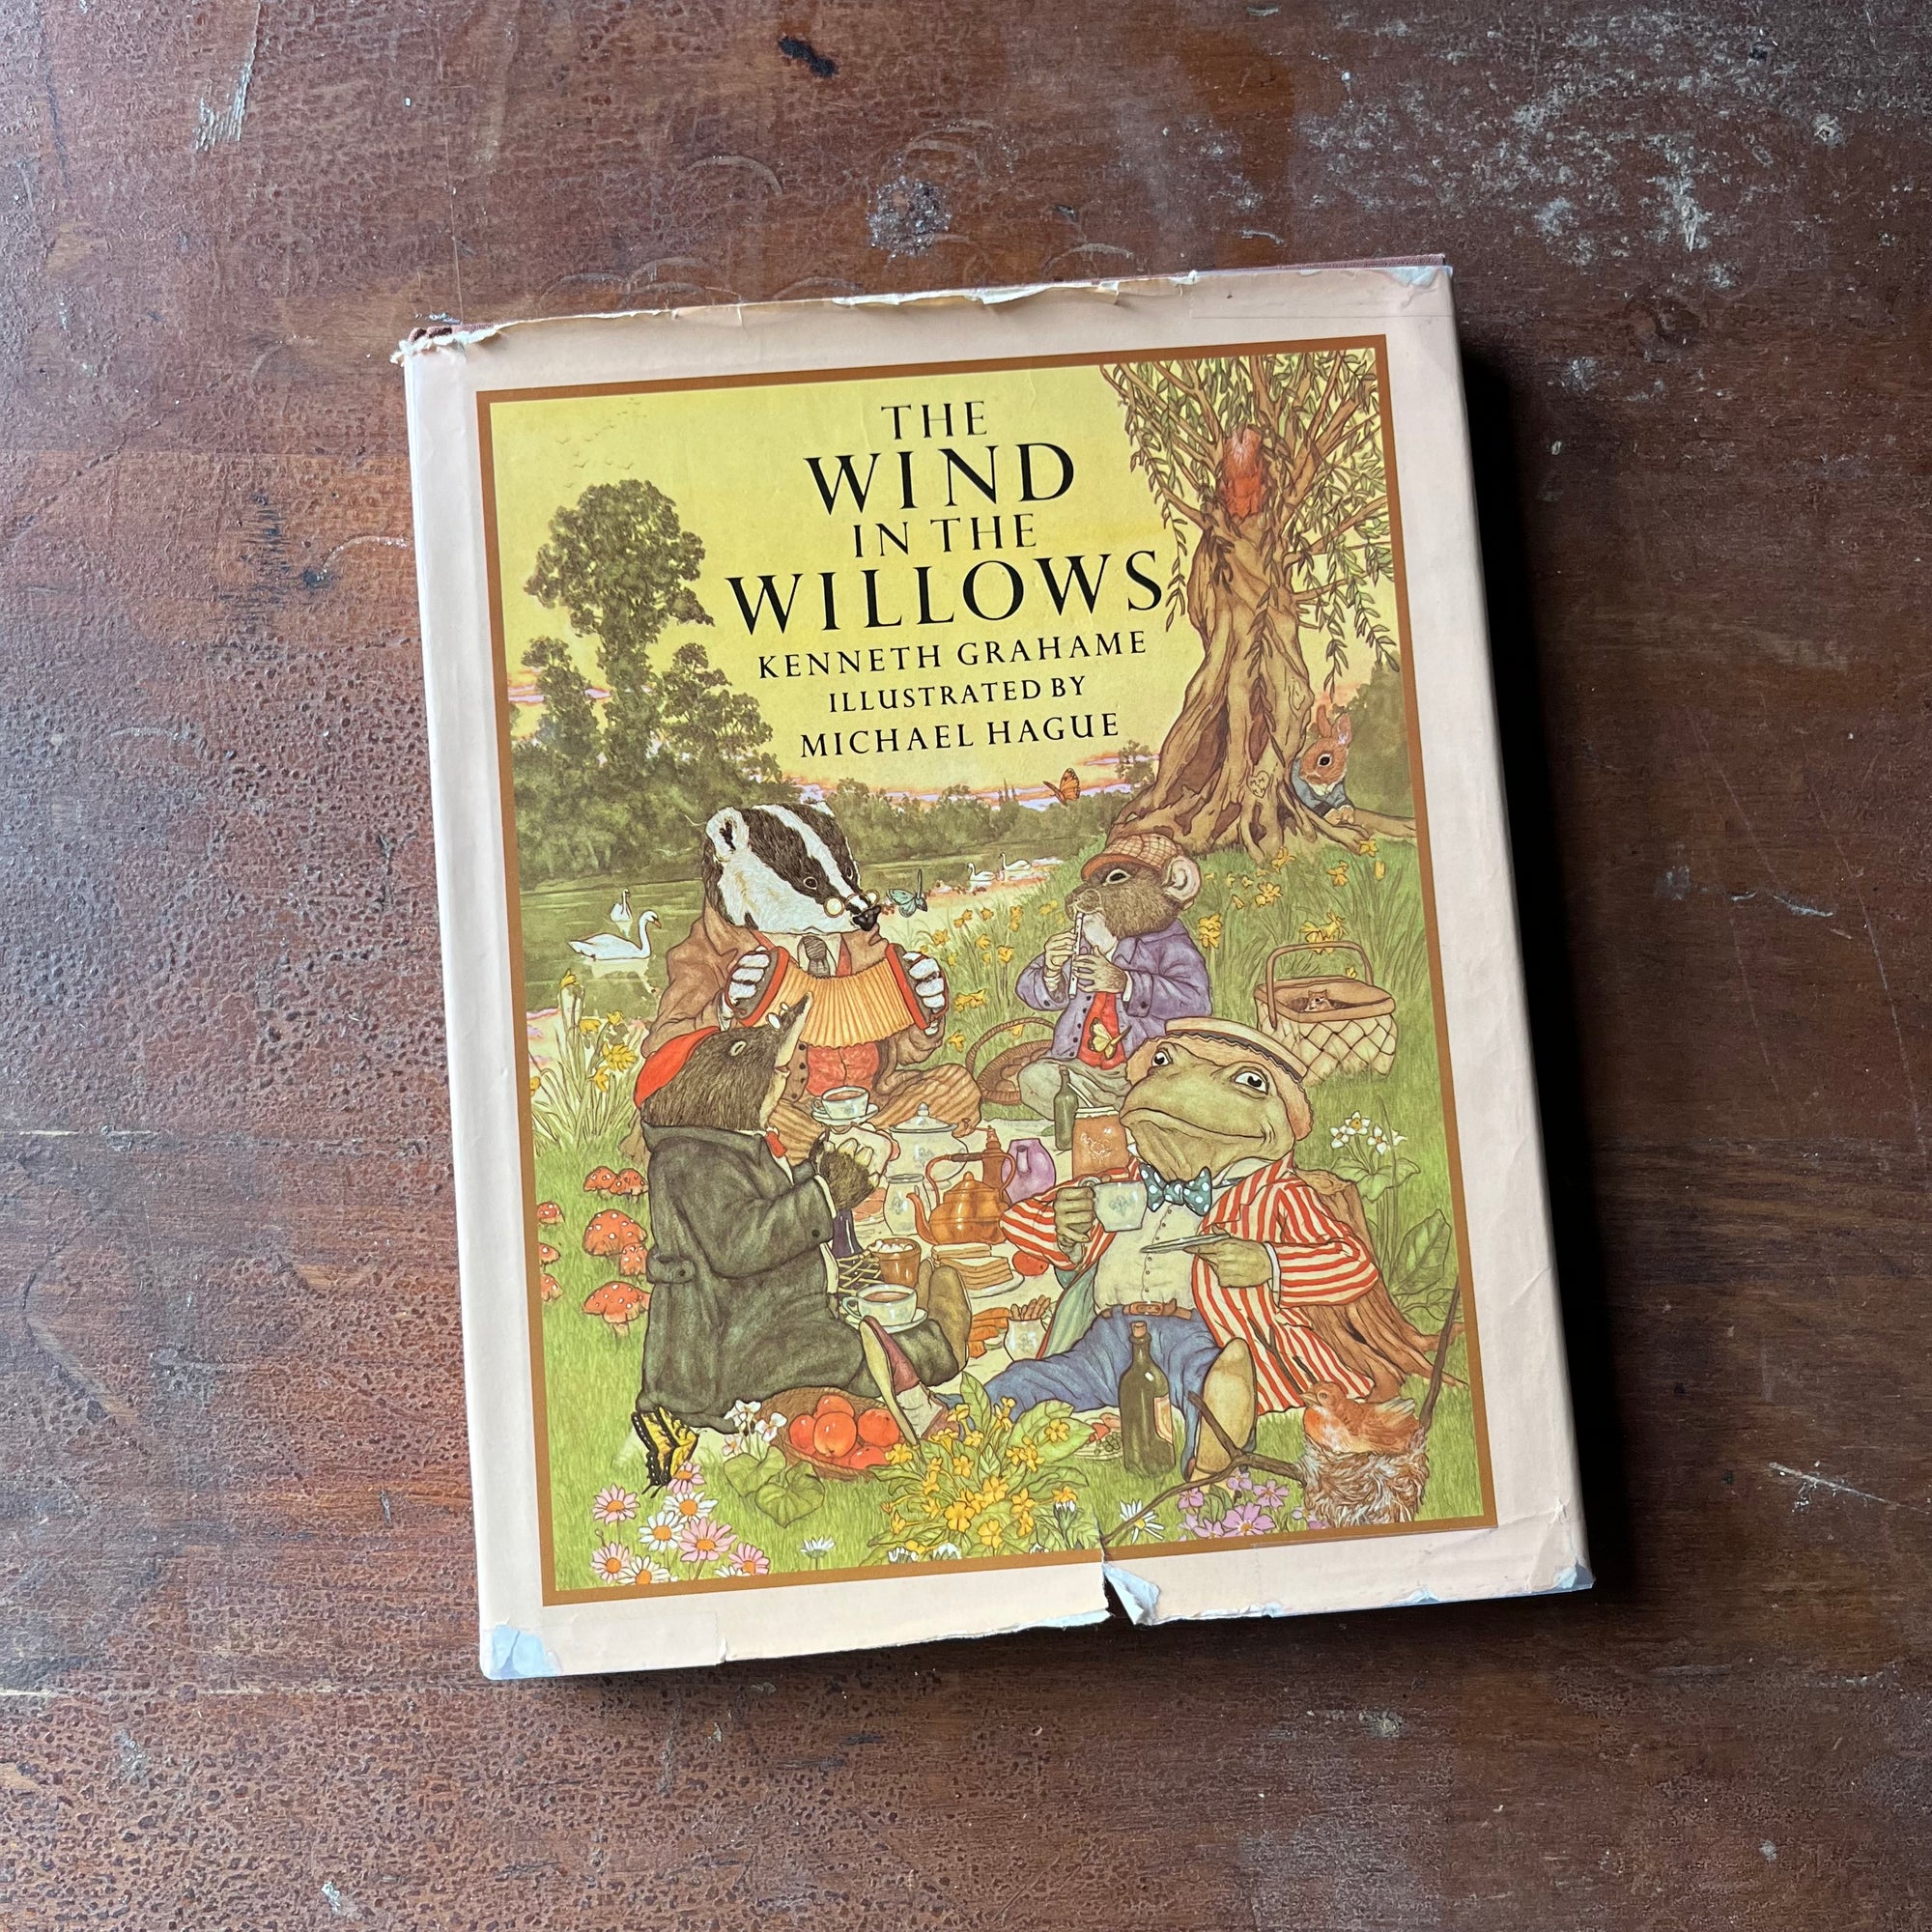 vintage children's chapter book, classic literature - The Wind in The Willows written by Kenneth Grahame with illustrations by Michel Hague - view of the dust jacket's front cover - note the wear around the edges